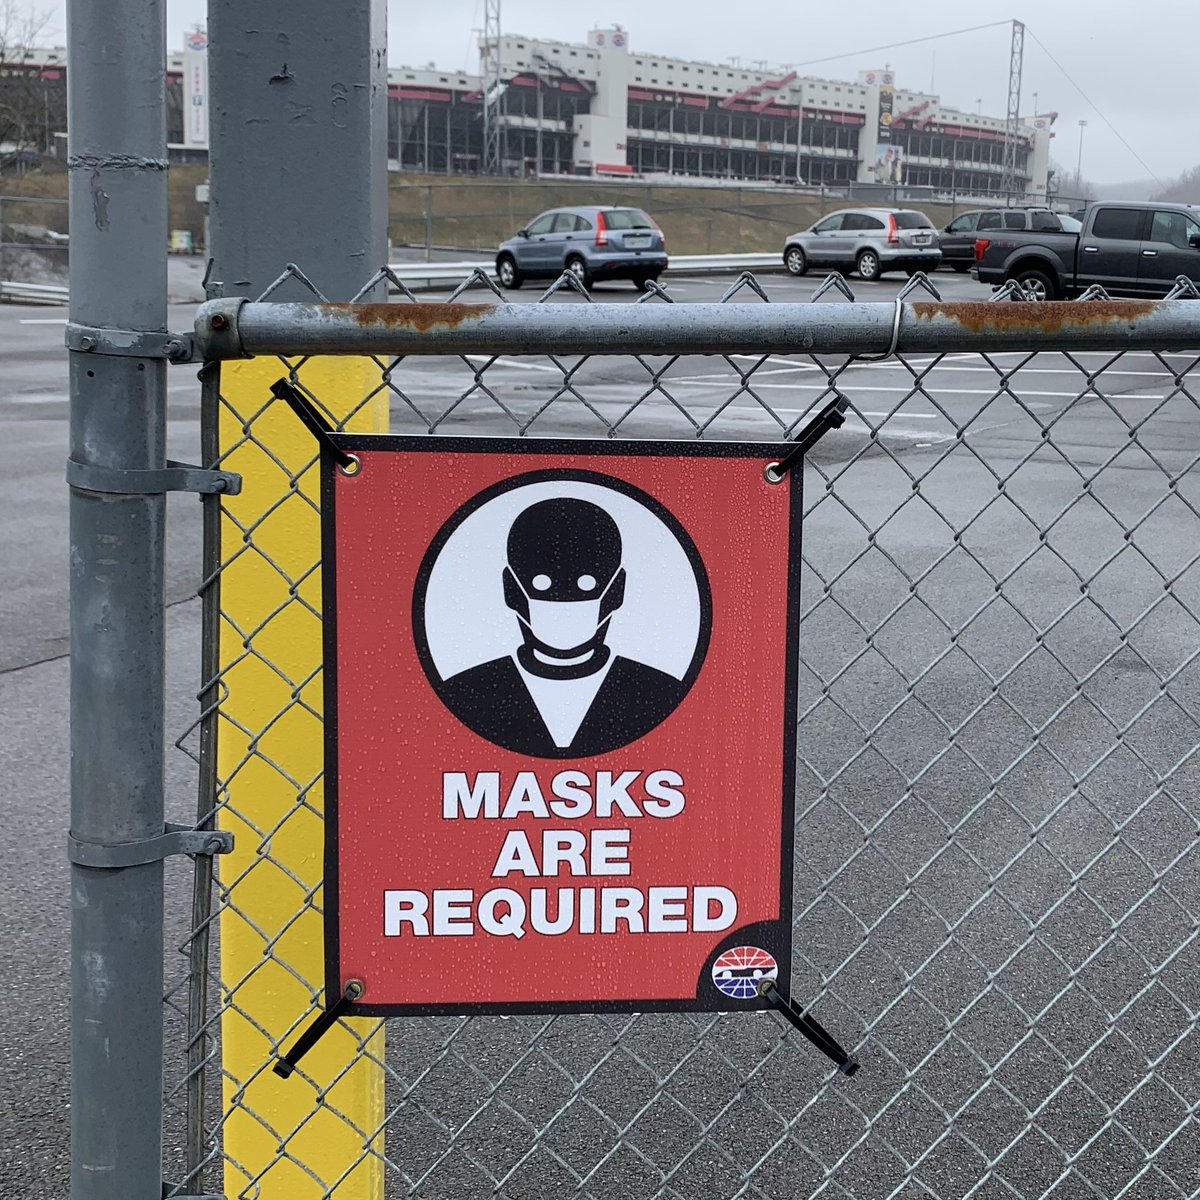 Definitely the creepiest mask sign I've seen to date (it's at the Bristol Motor Speedway) https://t.co/oLGl3aJdFP